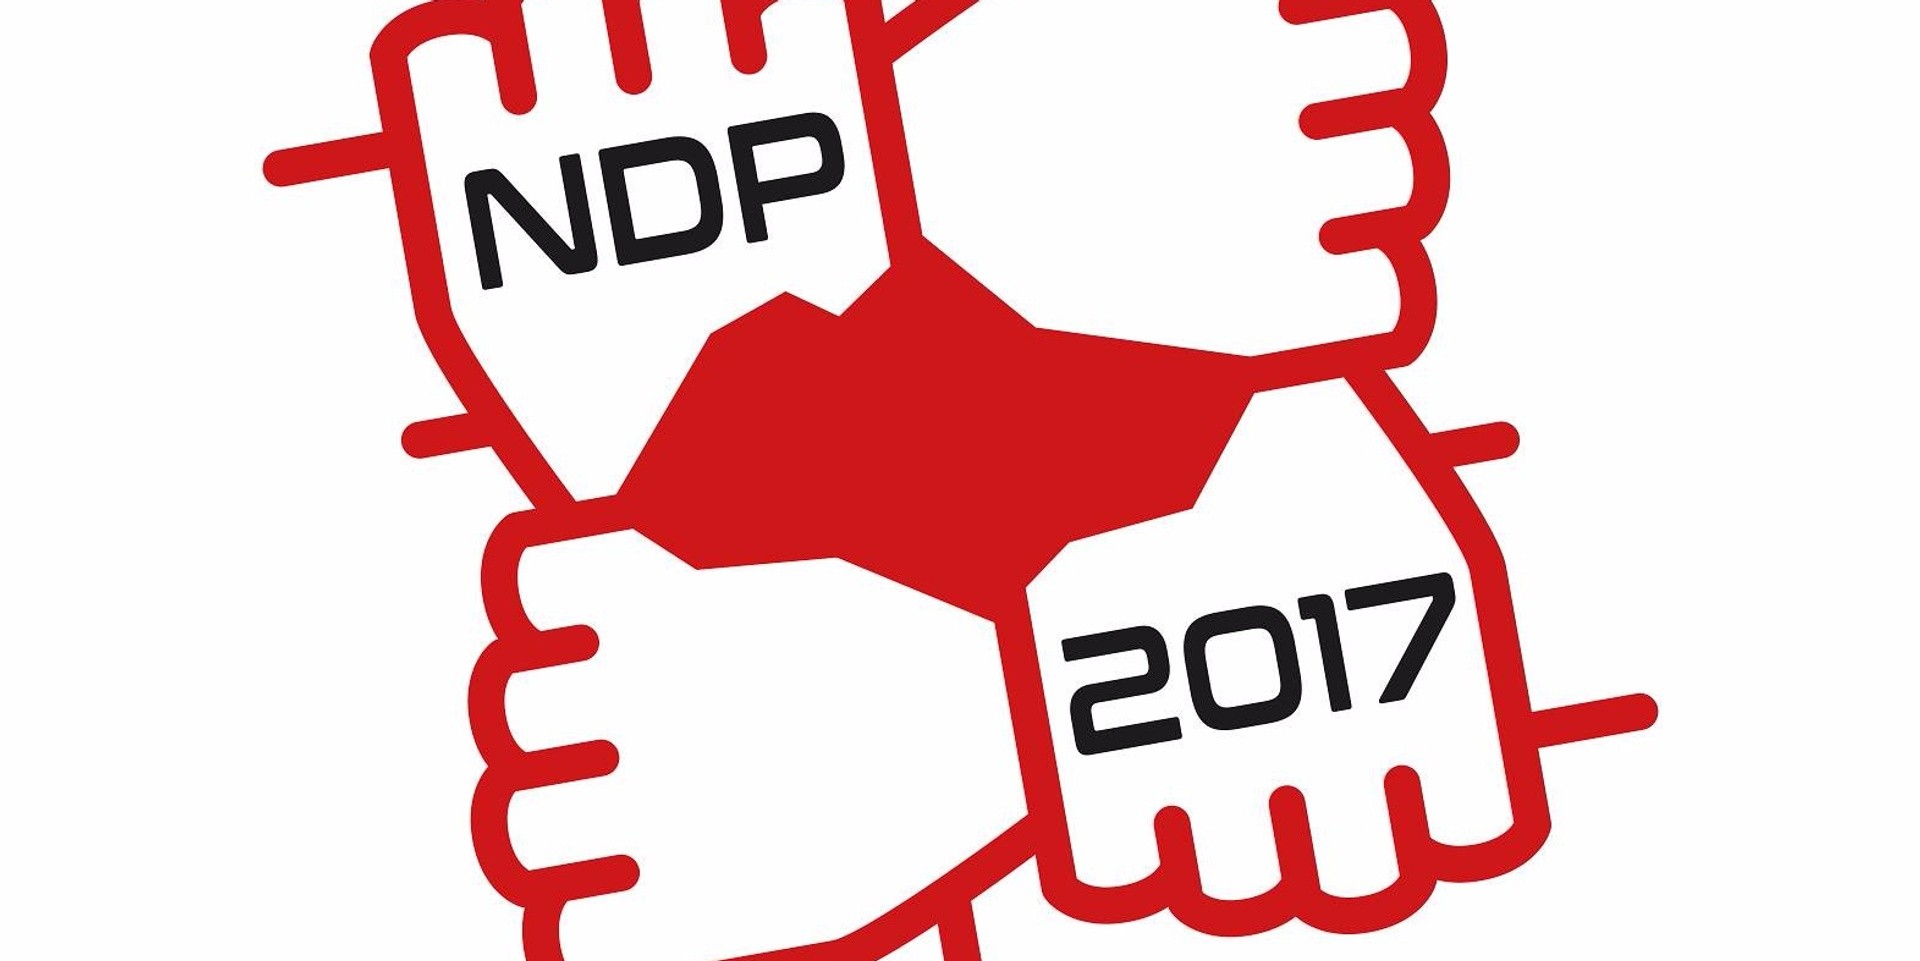 It's that time of the year again, the NDP song for 2017 has arrived — listen